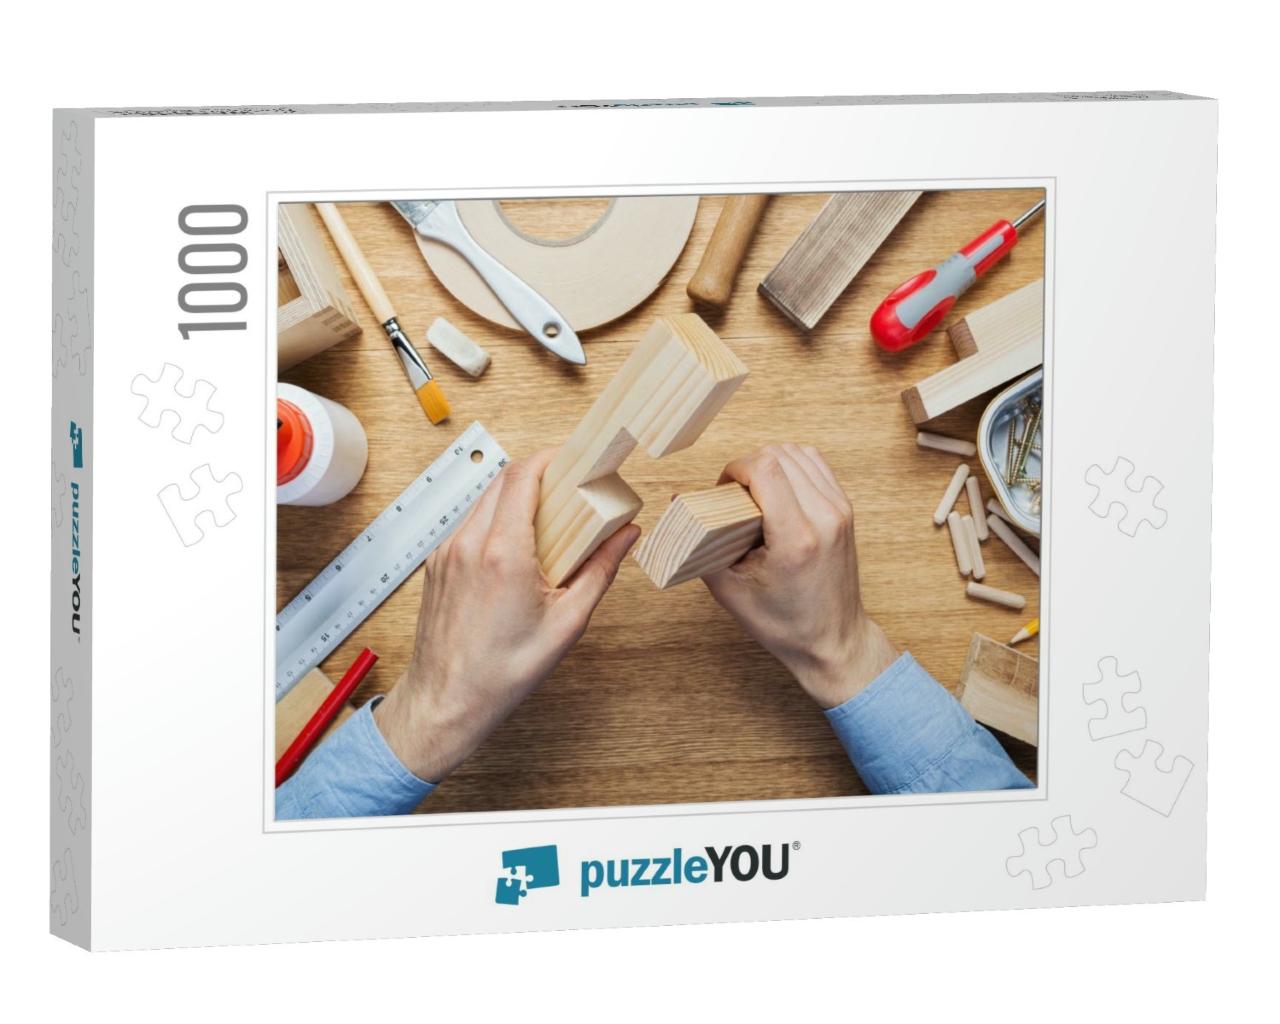 Woodworking Workshop Table Top Scene. Making of Wood Join... Jigsaw Puzzle with 1000 pieces